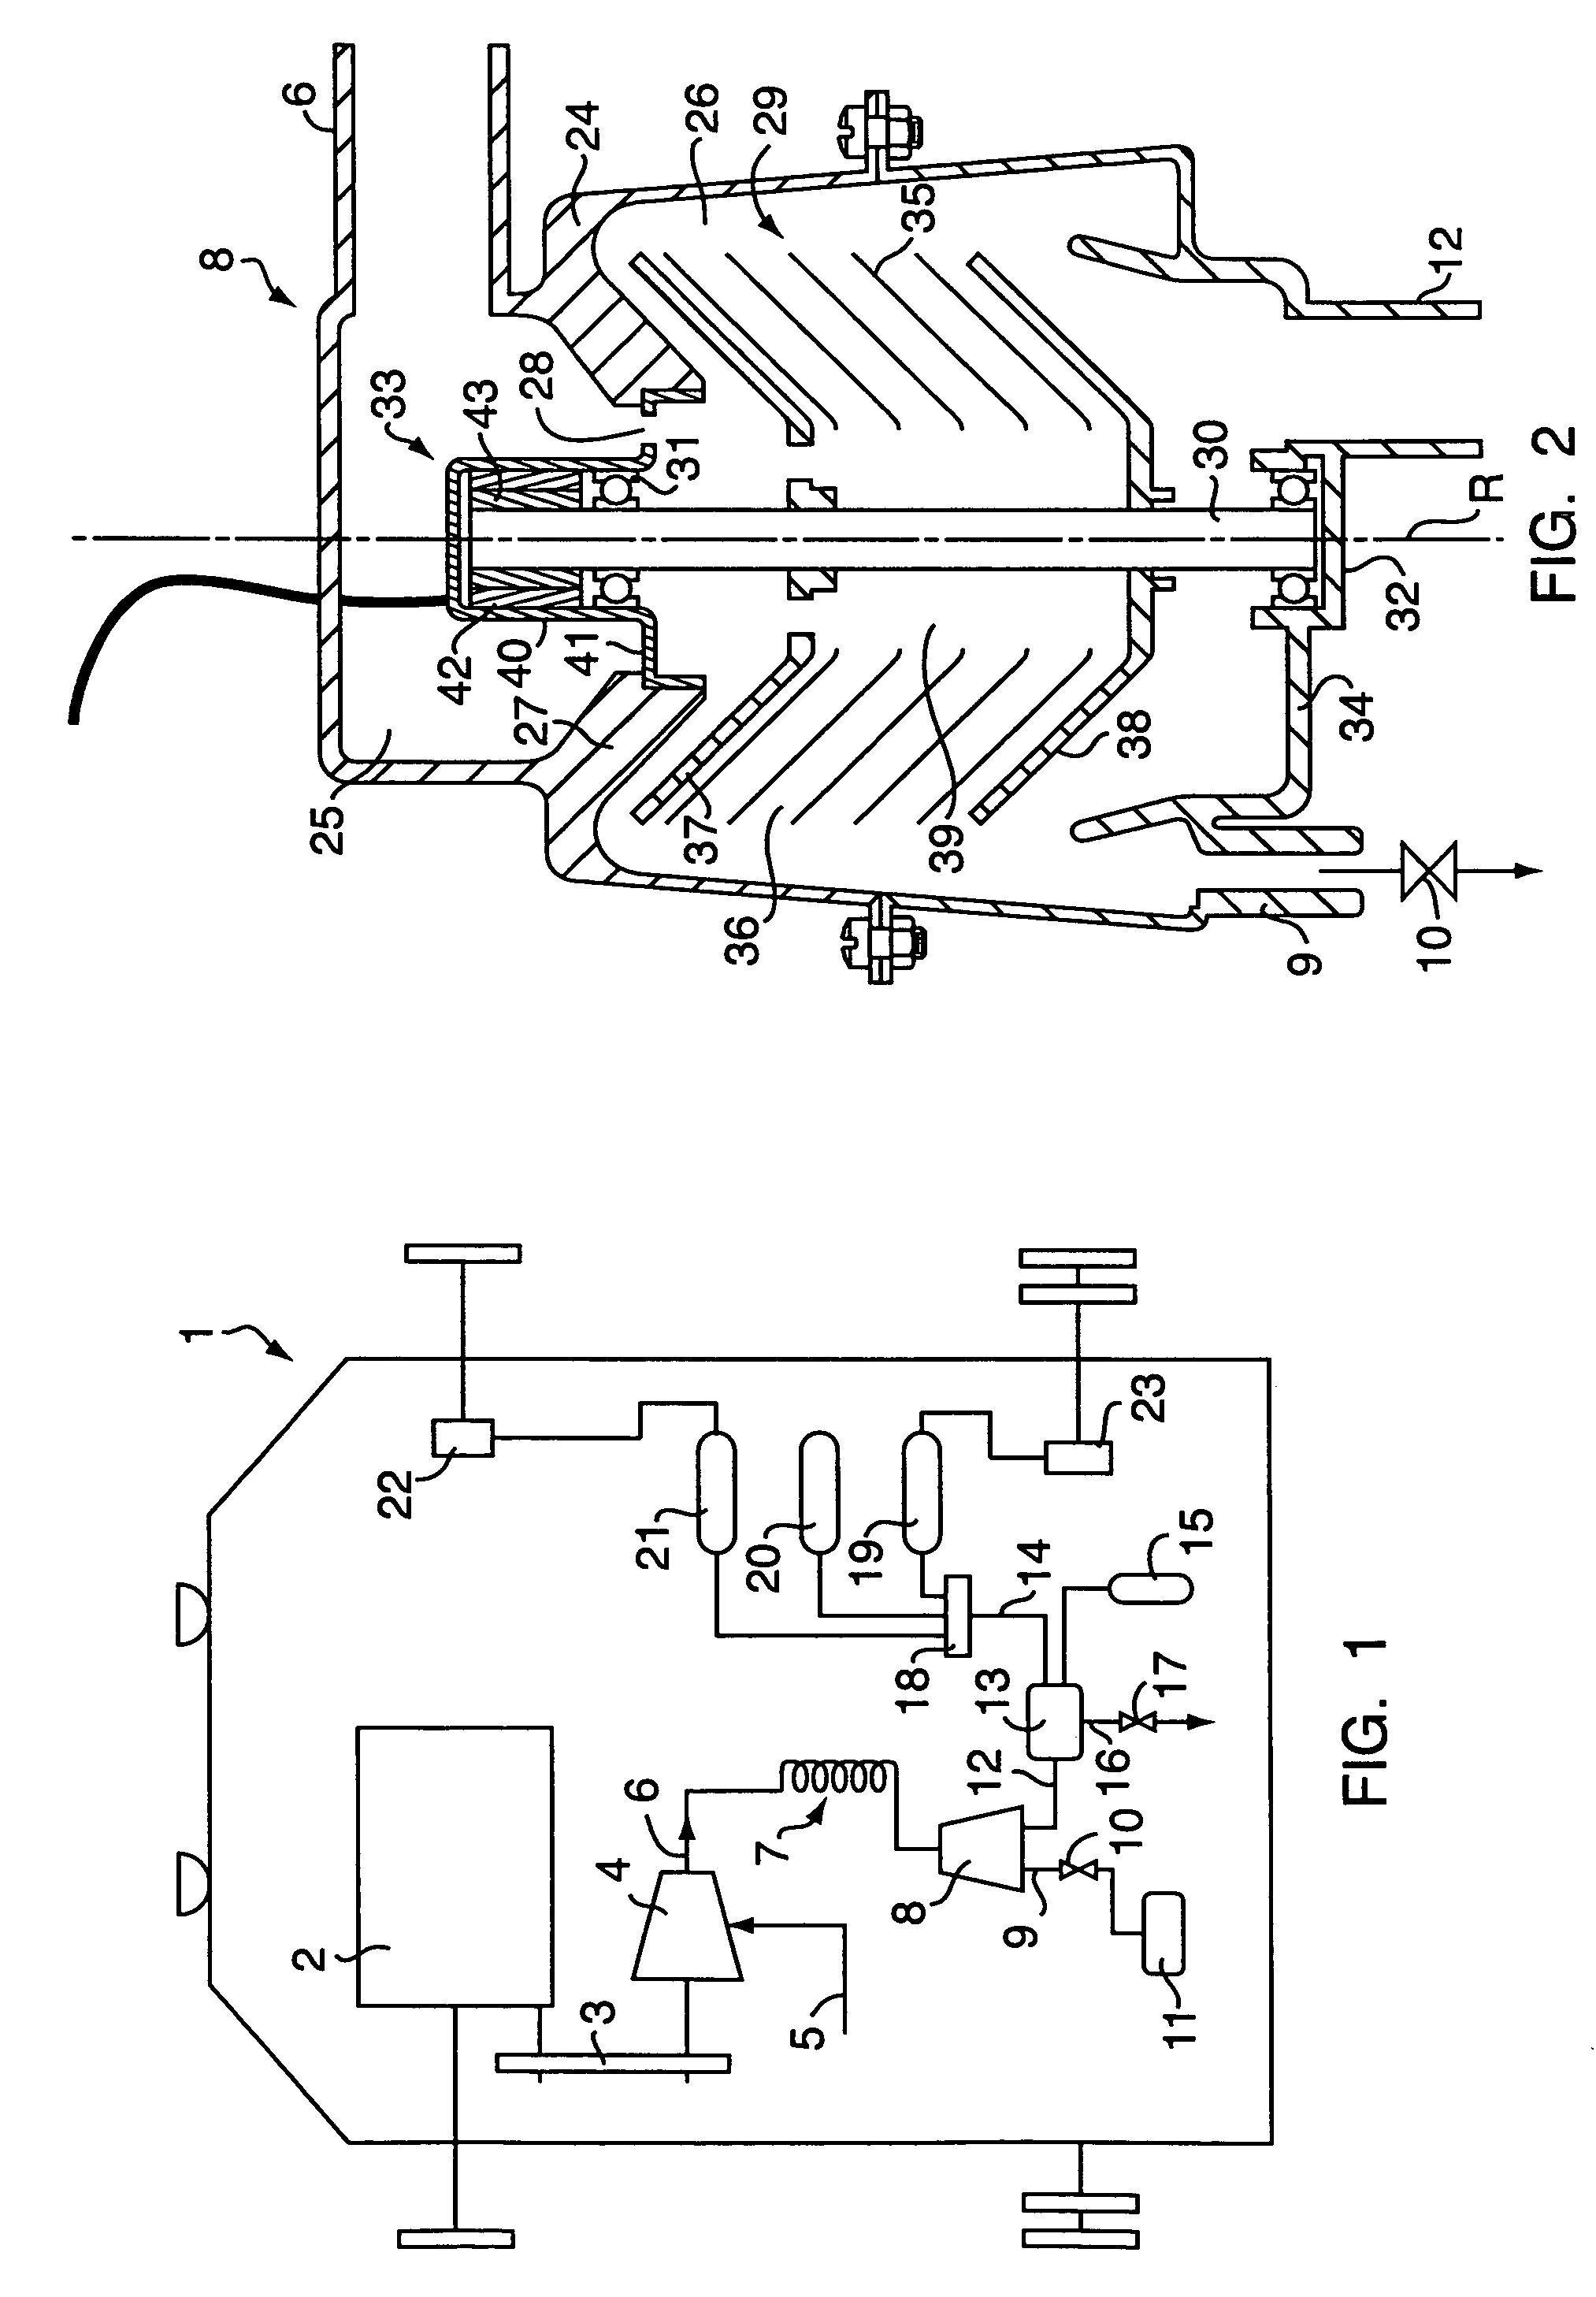 Method of treating air on board on a vehicle, and a device for use when performing the method